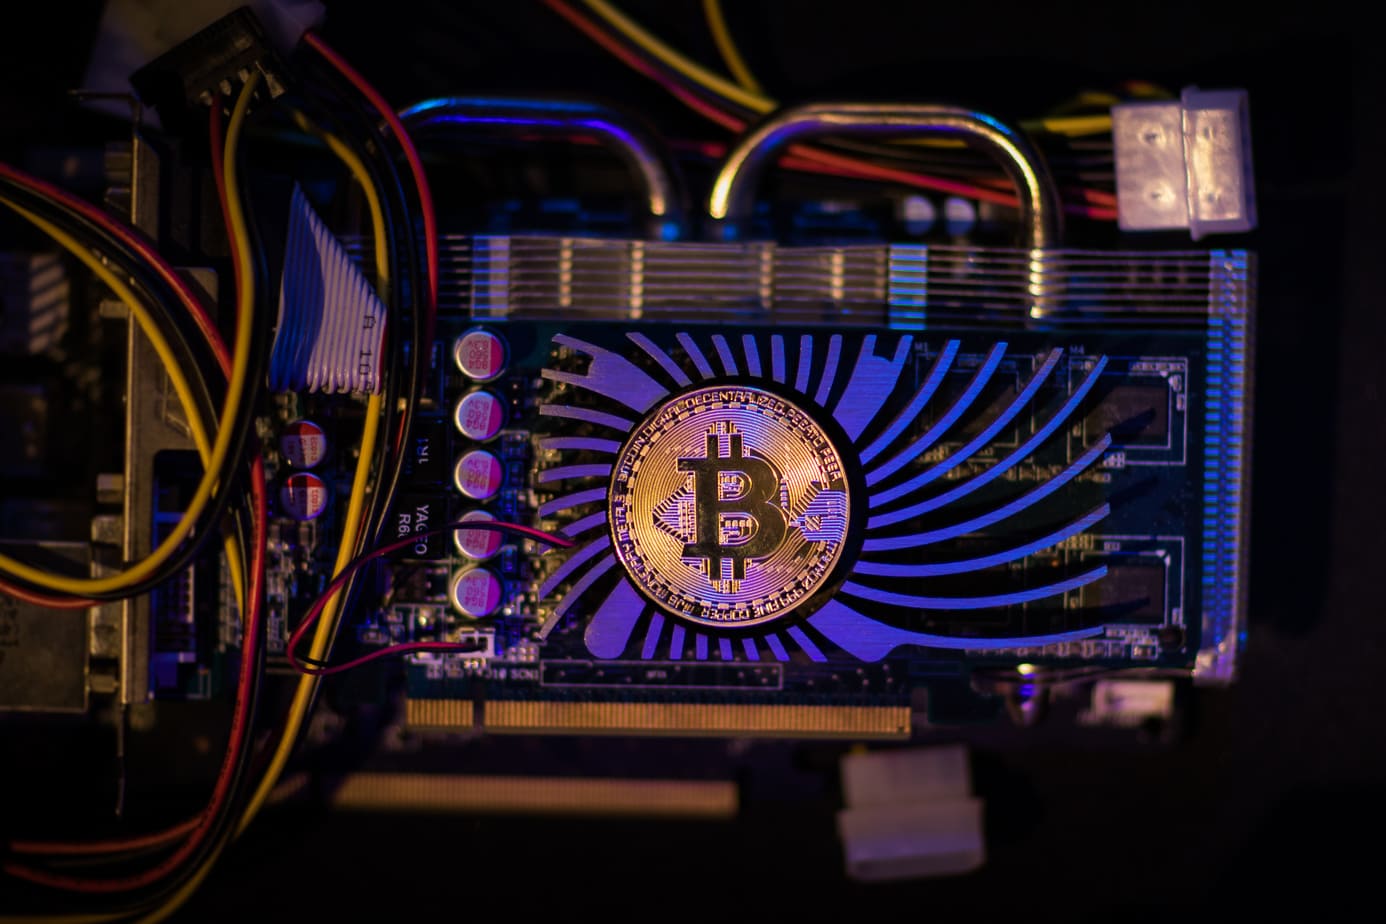 Bitcoin Miners' Sales Decline as Transaction Fees Drop, CryptoQuant Reports